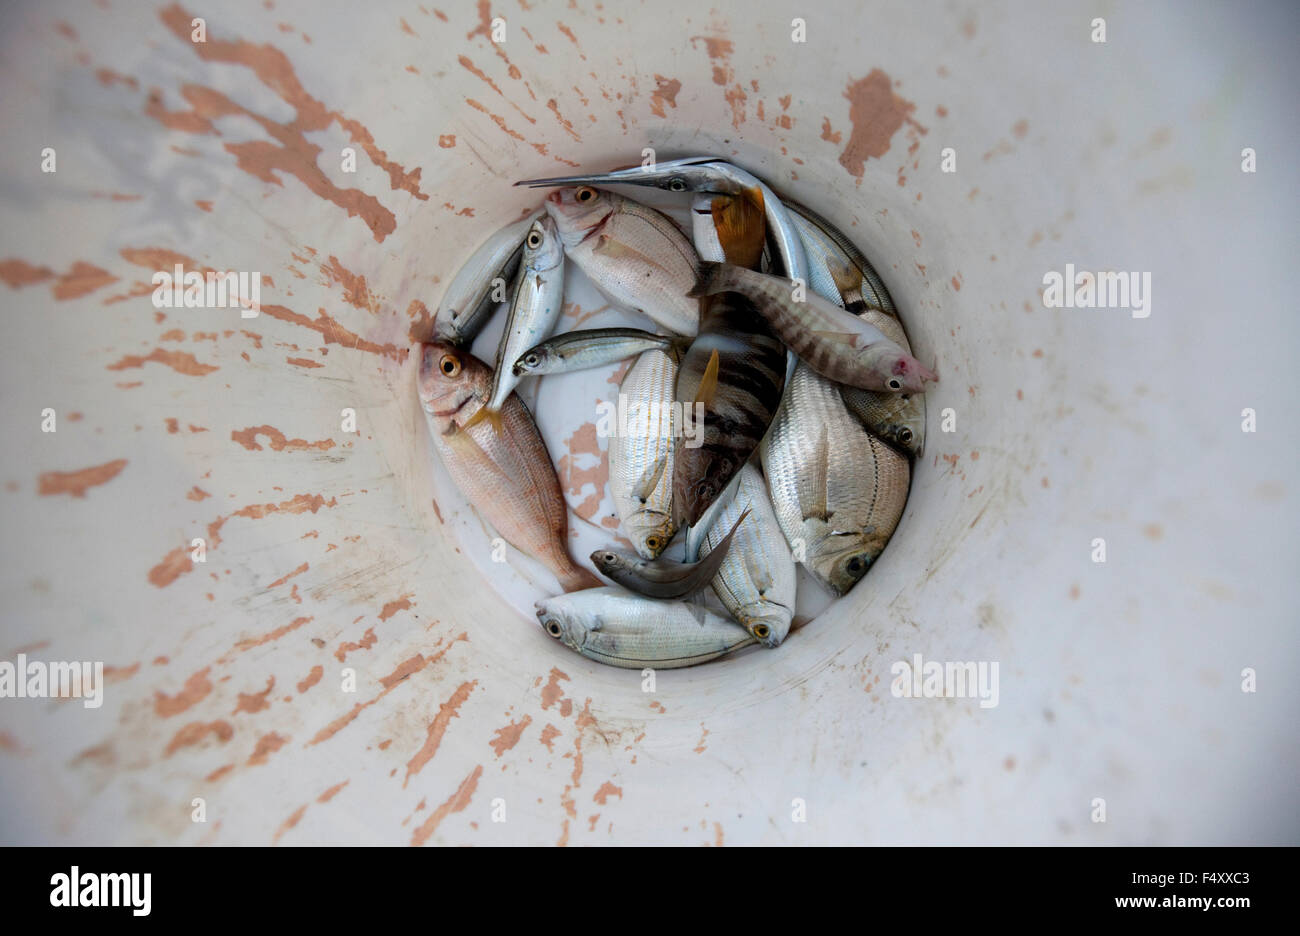 A fresh catch of various fish species laying on the bottom of a plastic bucket. Lemnos island, greece Stock Photo